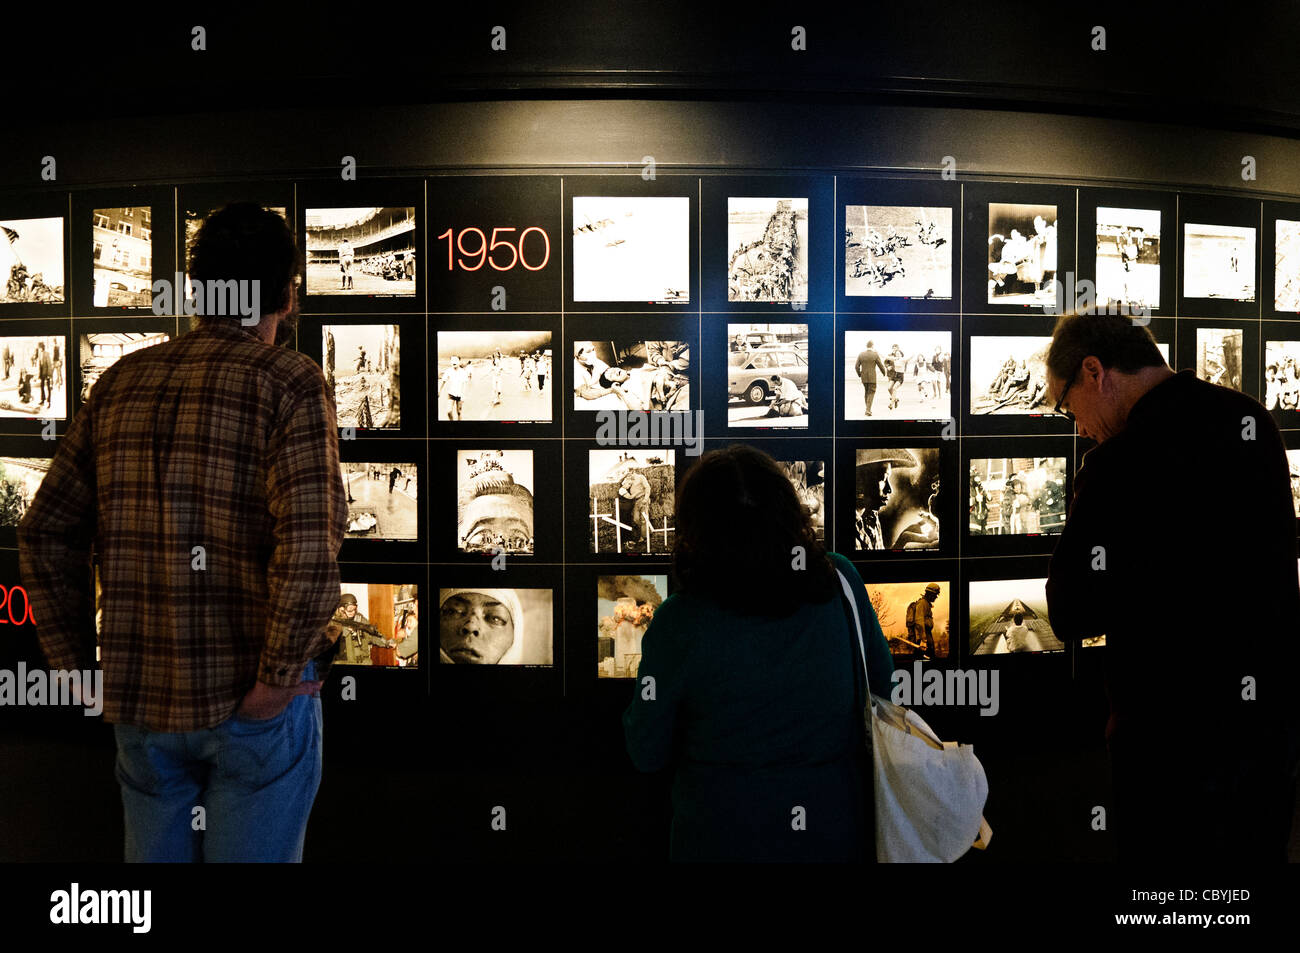 WASHINGTON DC, USA - Visitors view an exhibition of all the Pulitzer Prize winning photographs in the Newseum in downtown Washington DC. The Newseum is a 7-story, privately funded museum dedicated to journalism and news. It opened at its current location on Pennsylvania Avenue in April 2008. Stock Photo